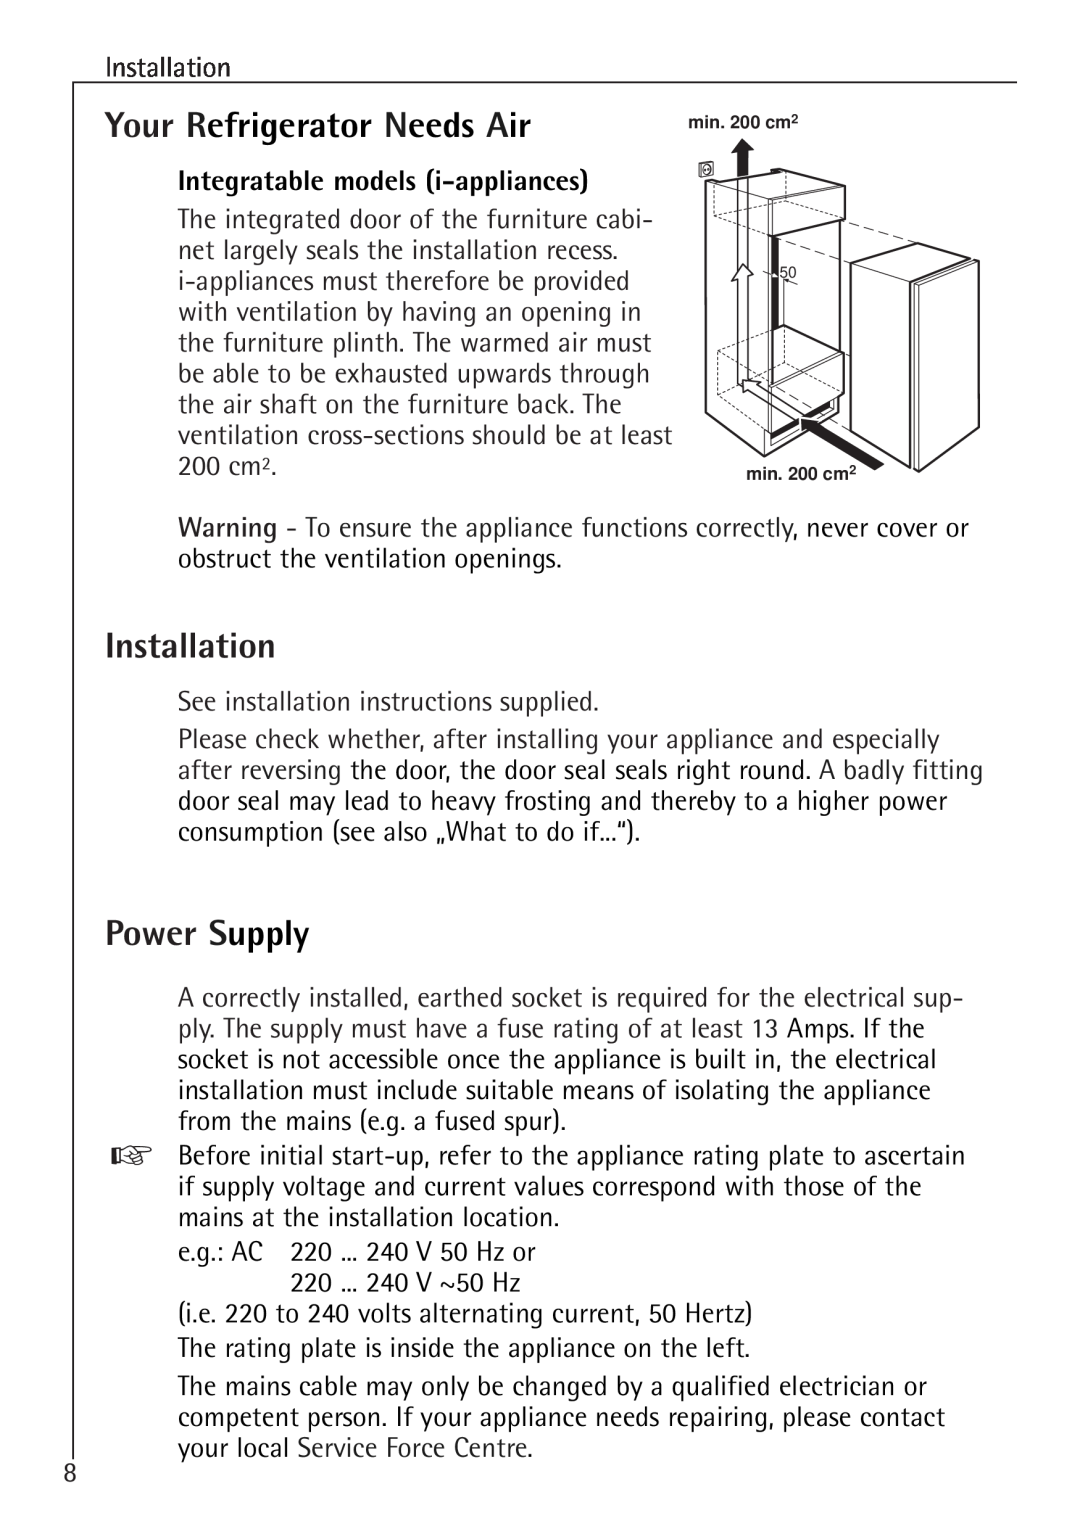 Electrolux K 98840-4 i manual Your Refrigerator Needs Air, Installation, Power Supply, Integratable models i-appliances 